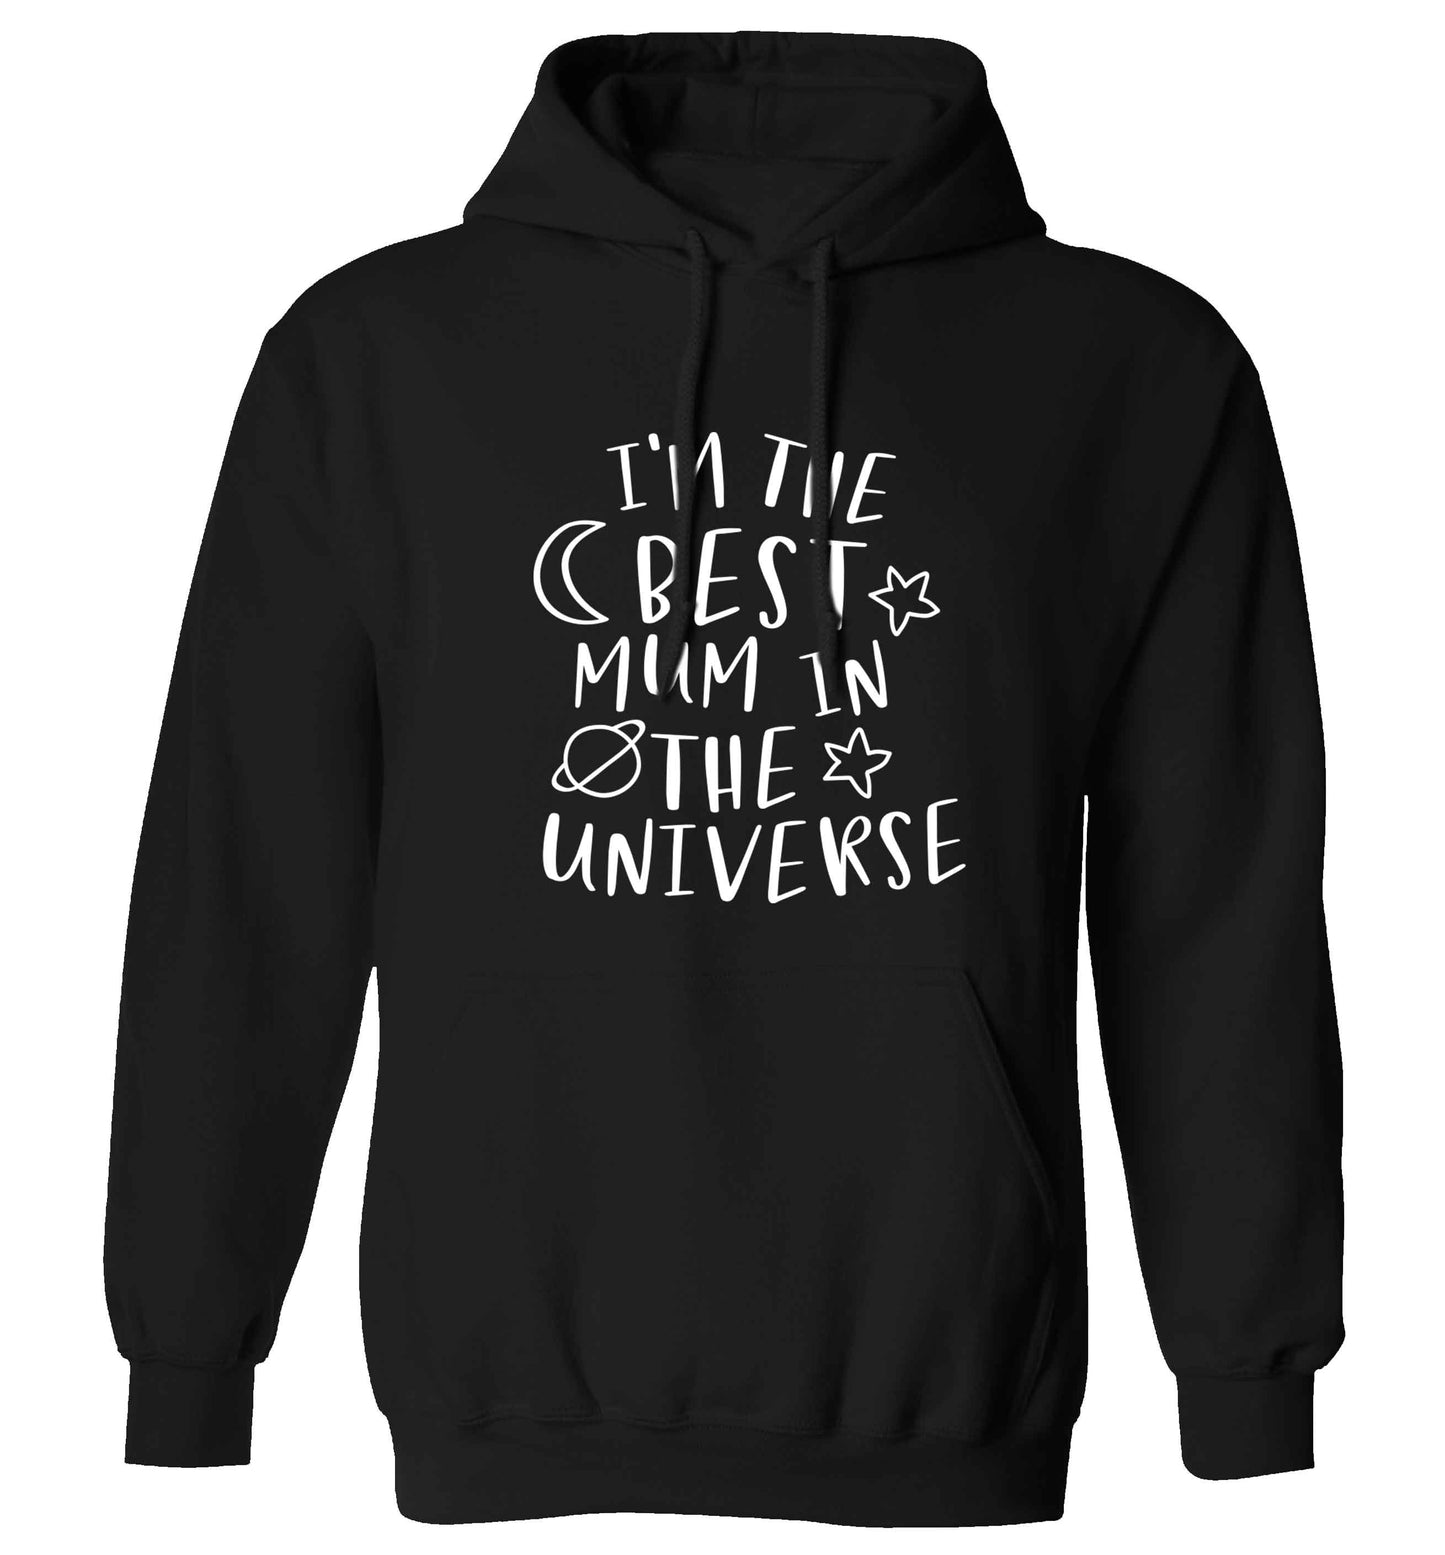 I'm the best mum in the universe adults unisex black hoodie 2XL